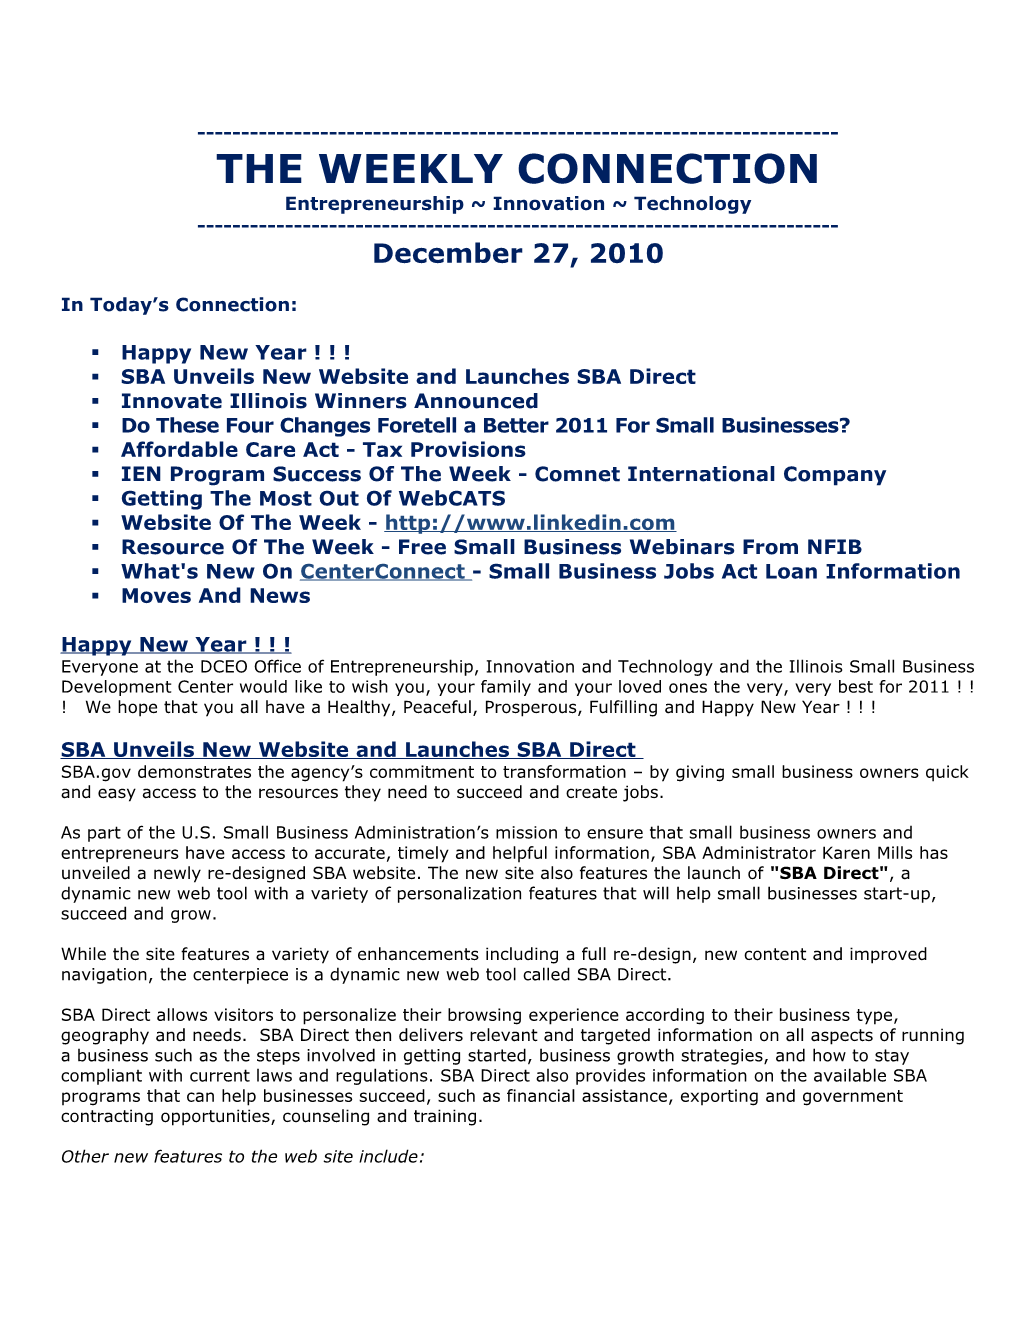 The Weekly Connection s1